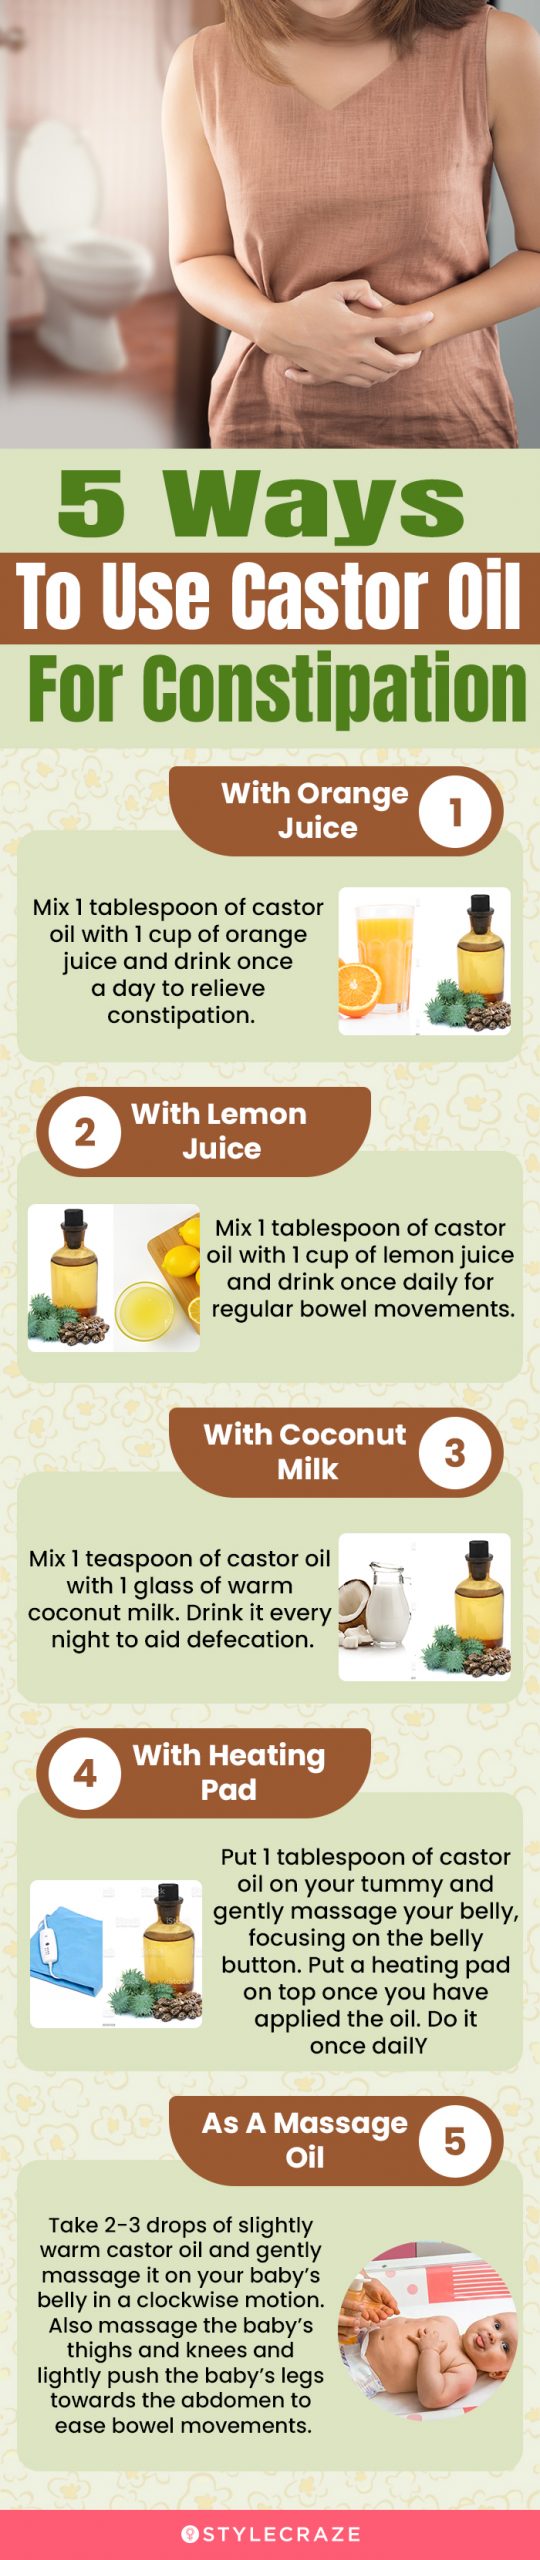 5 ways to use castor oil for constipation (infographic)